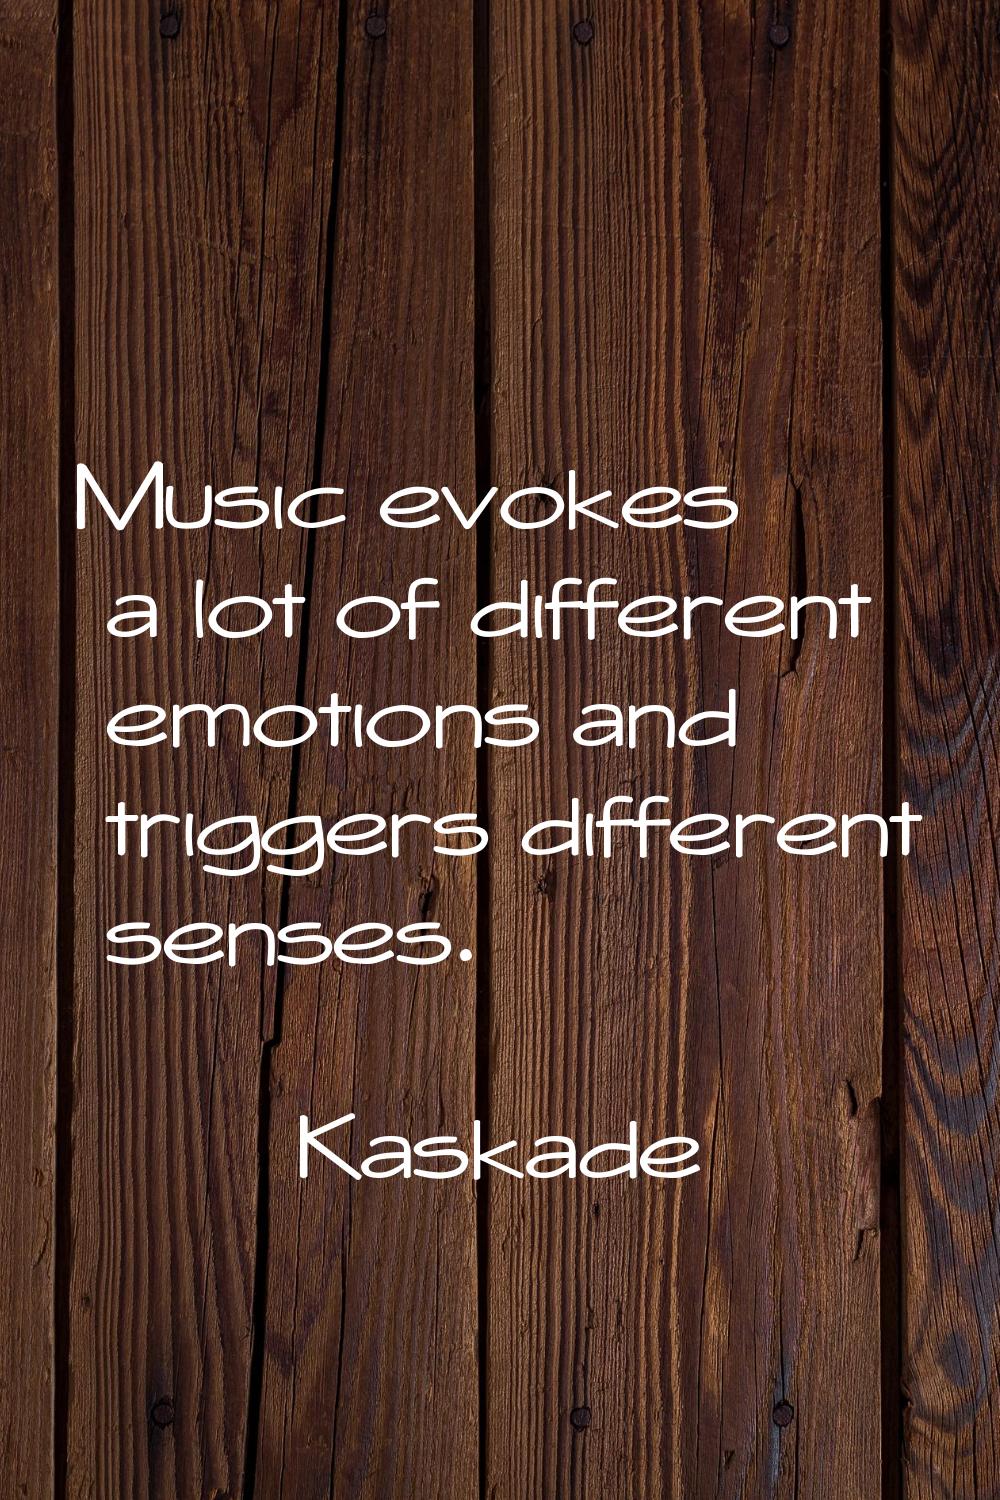 Music evokes a lot of different emotions and triggers different senses.